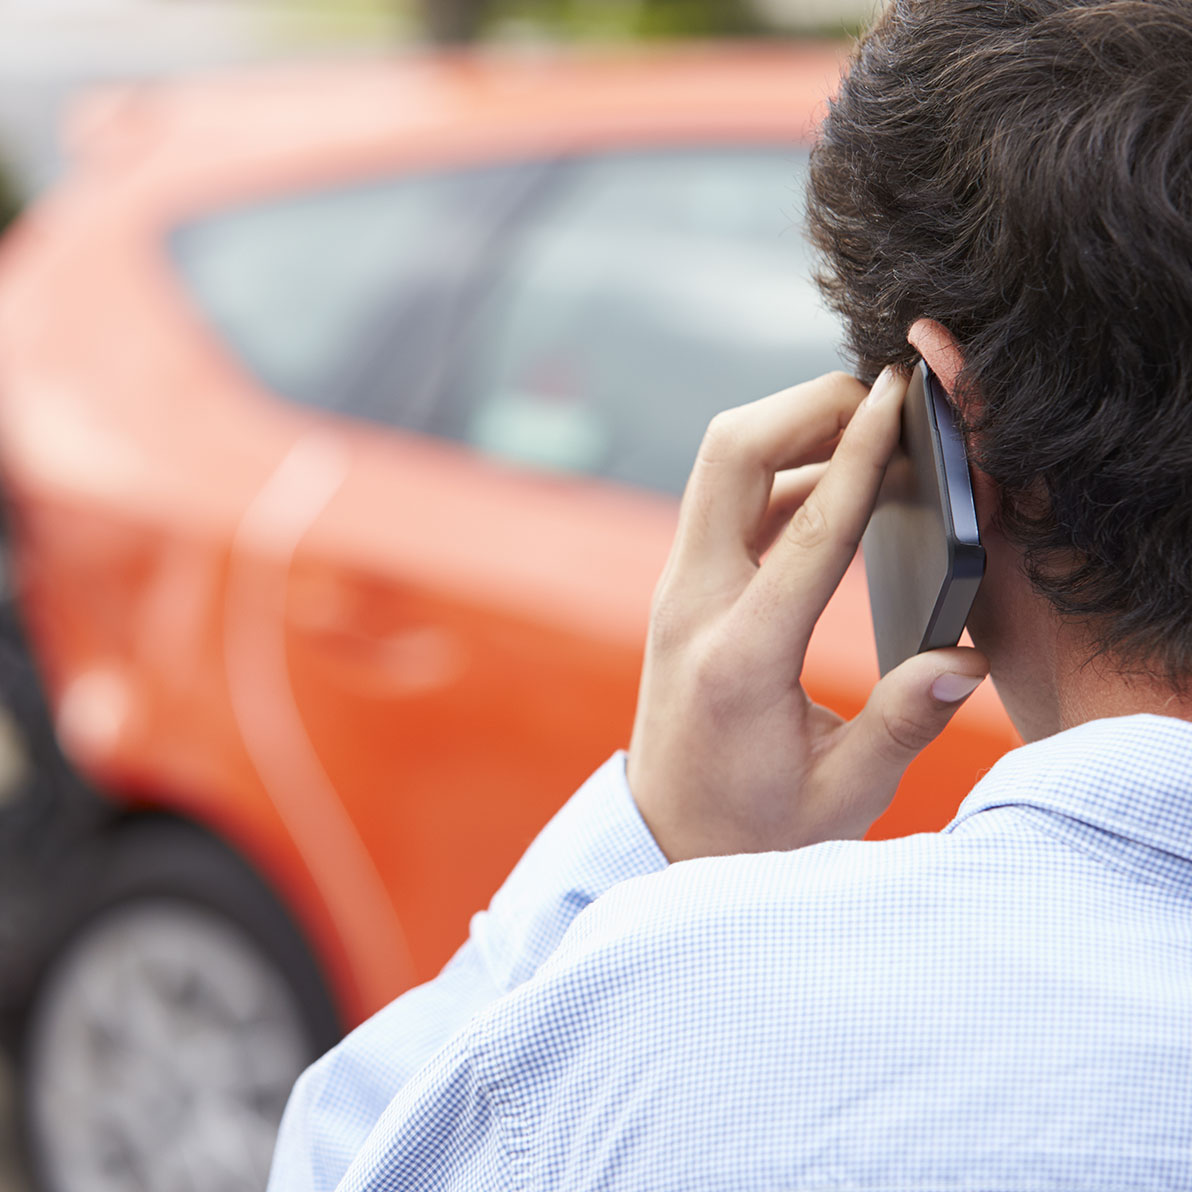 Calling a Lawyer after a Car Accident